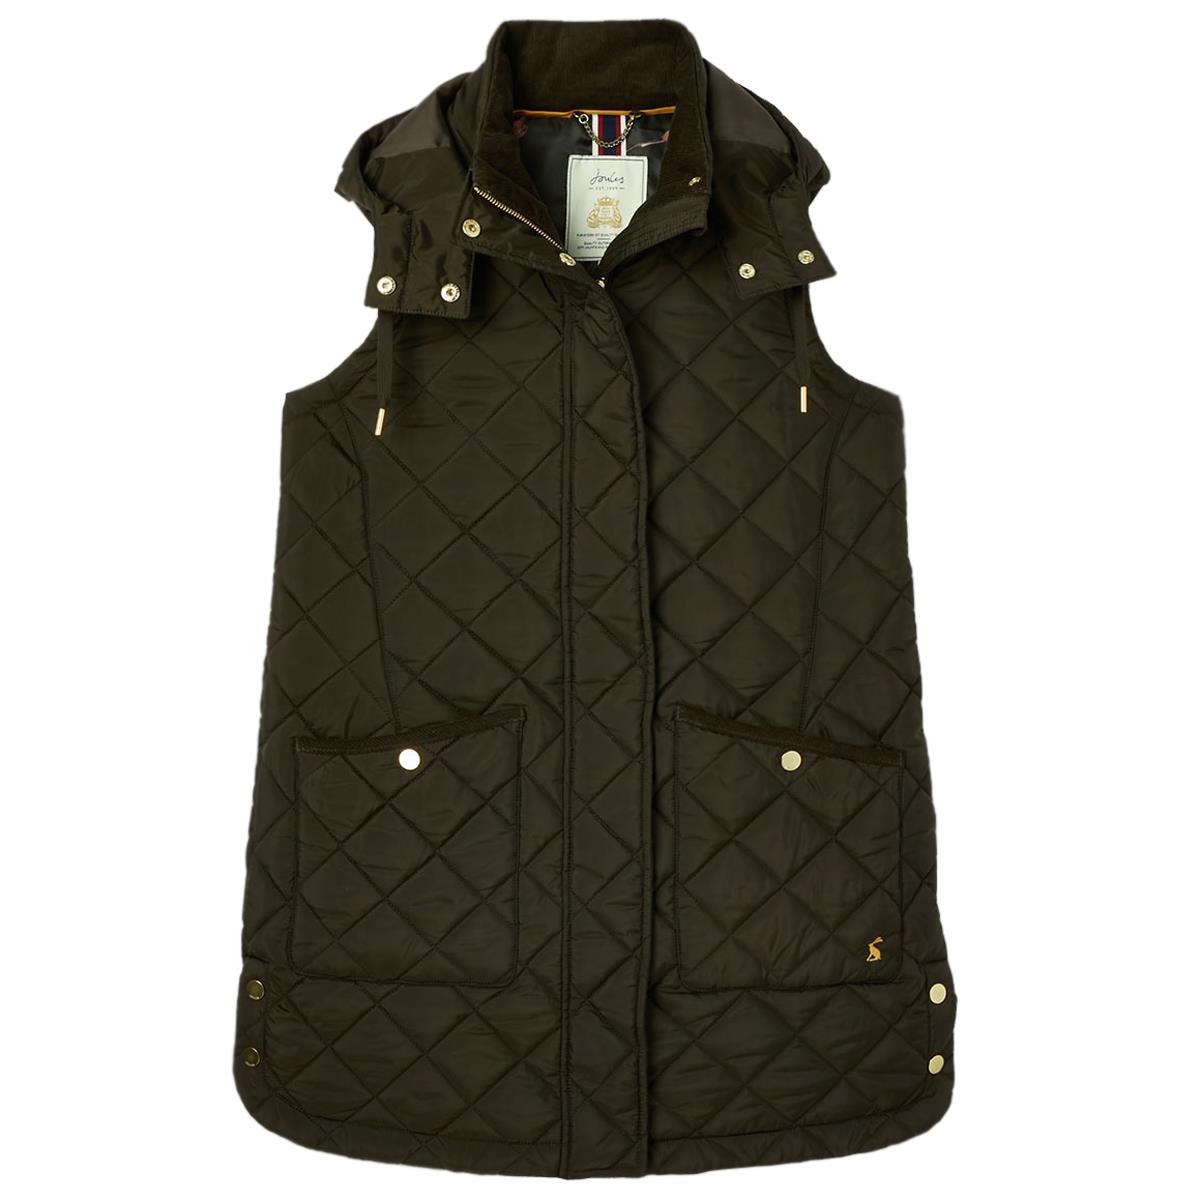 Joules Womens Chatham Gilet Questions & Answers